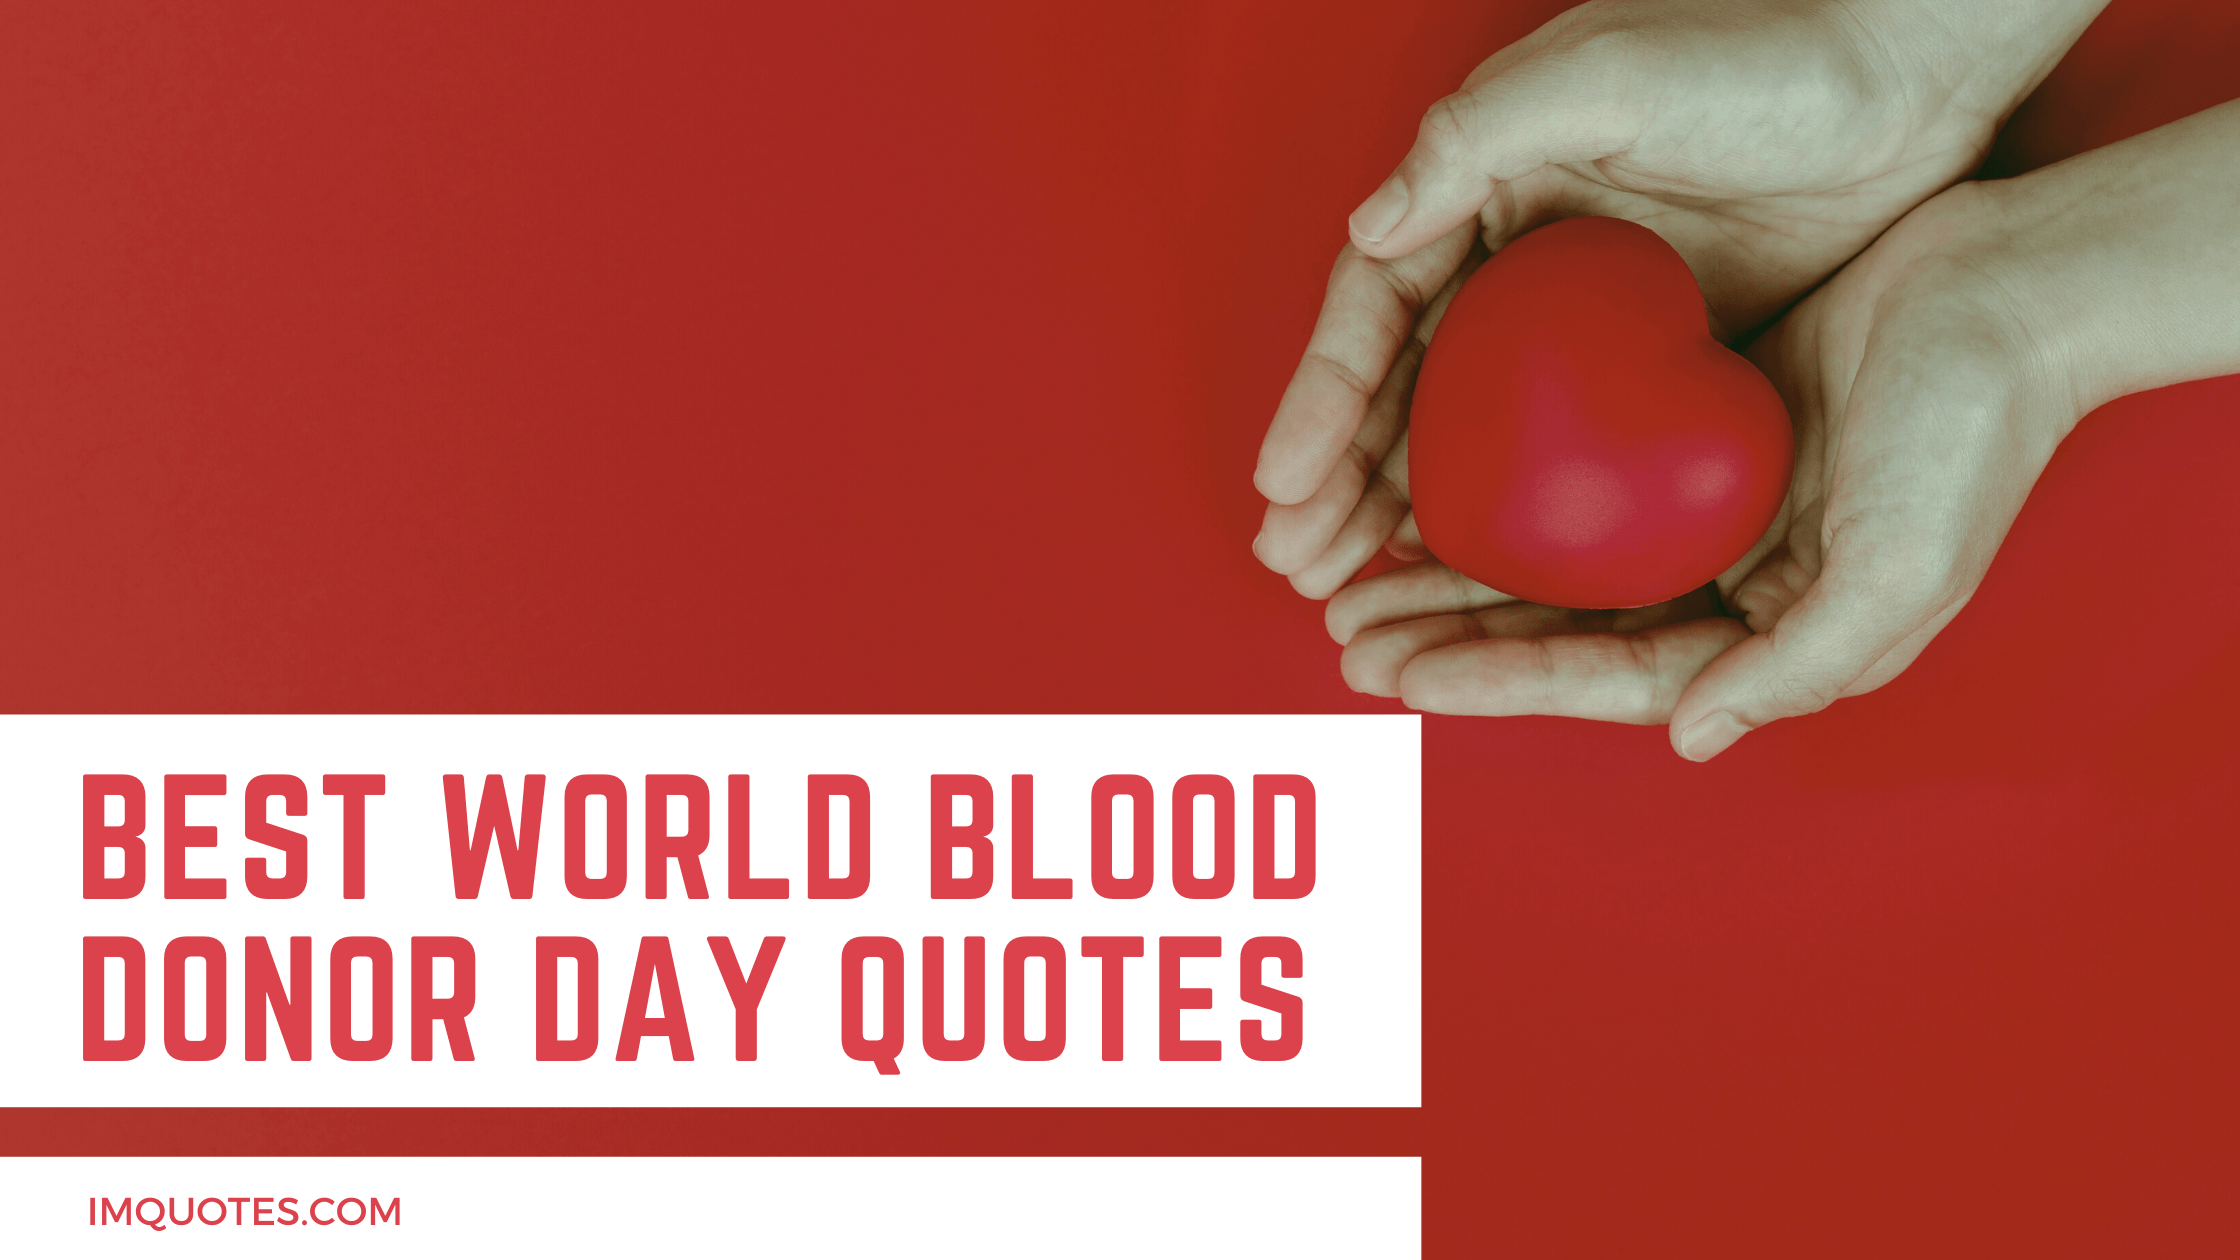 Best World Blood Donor Day Quotes